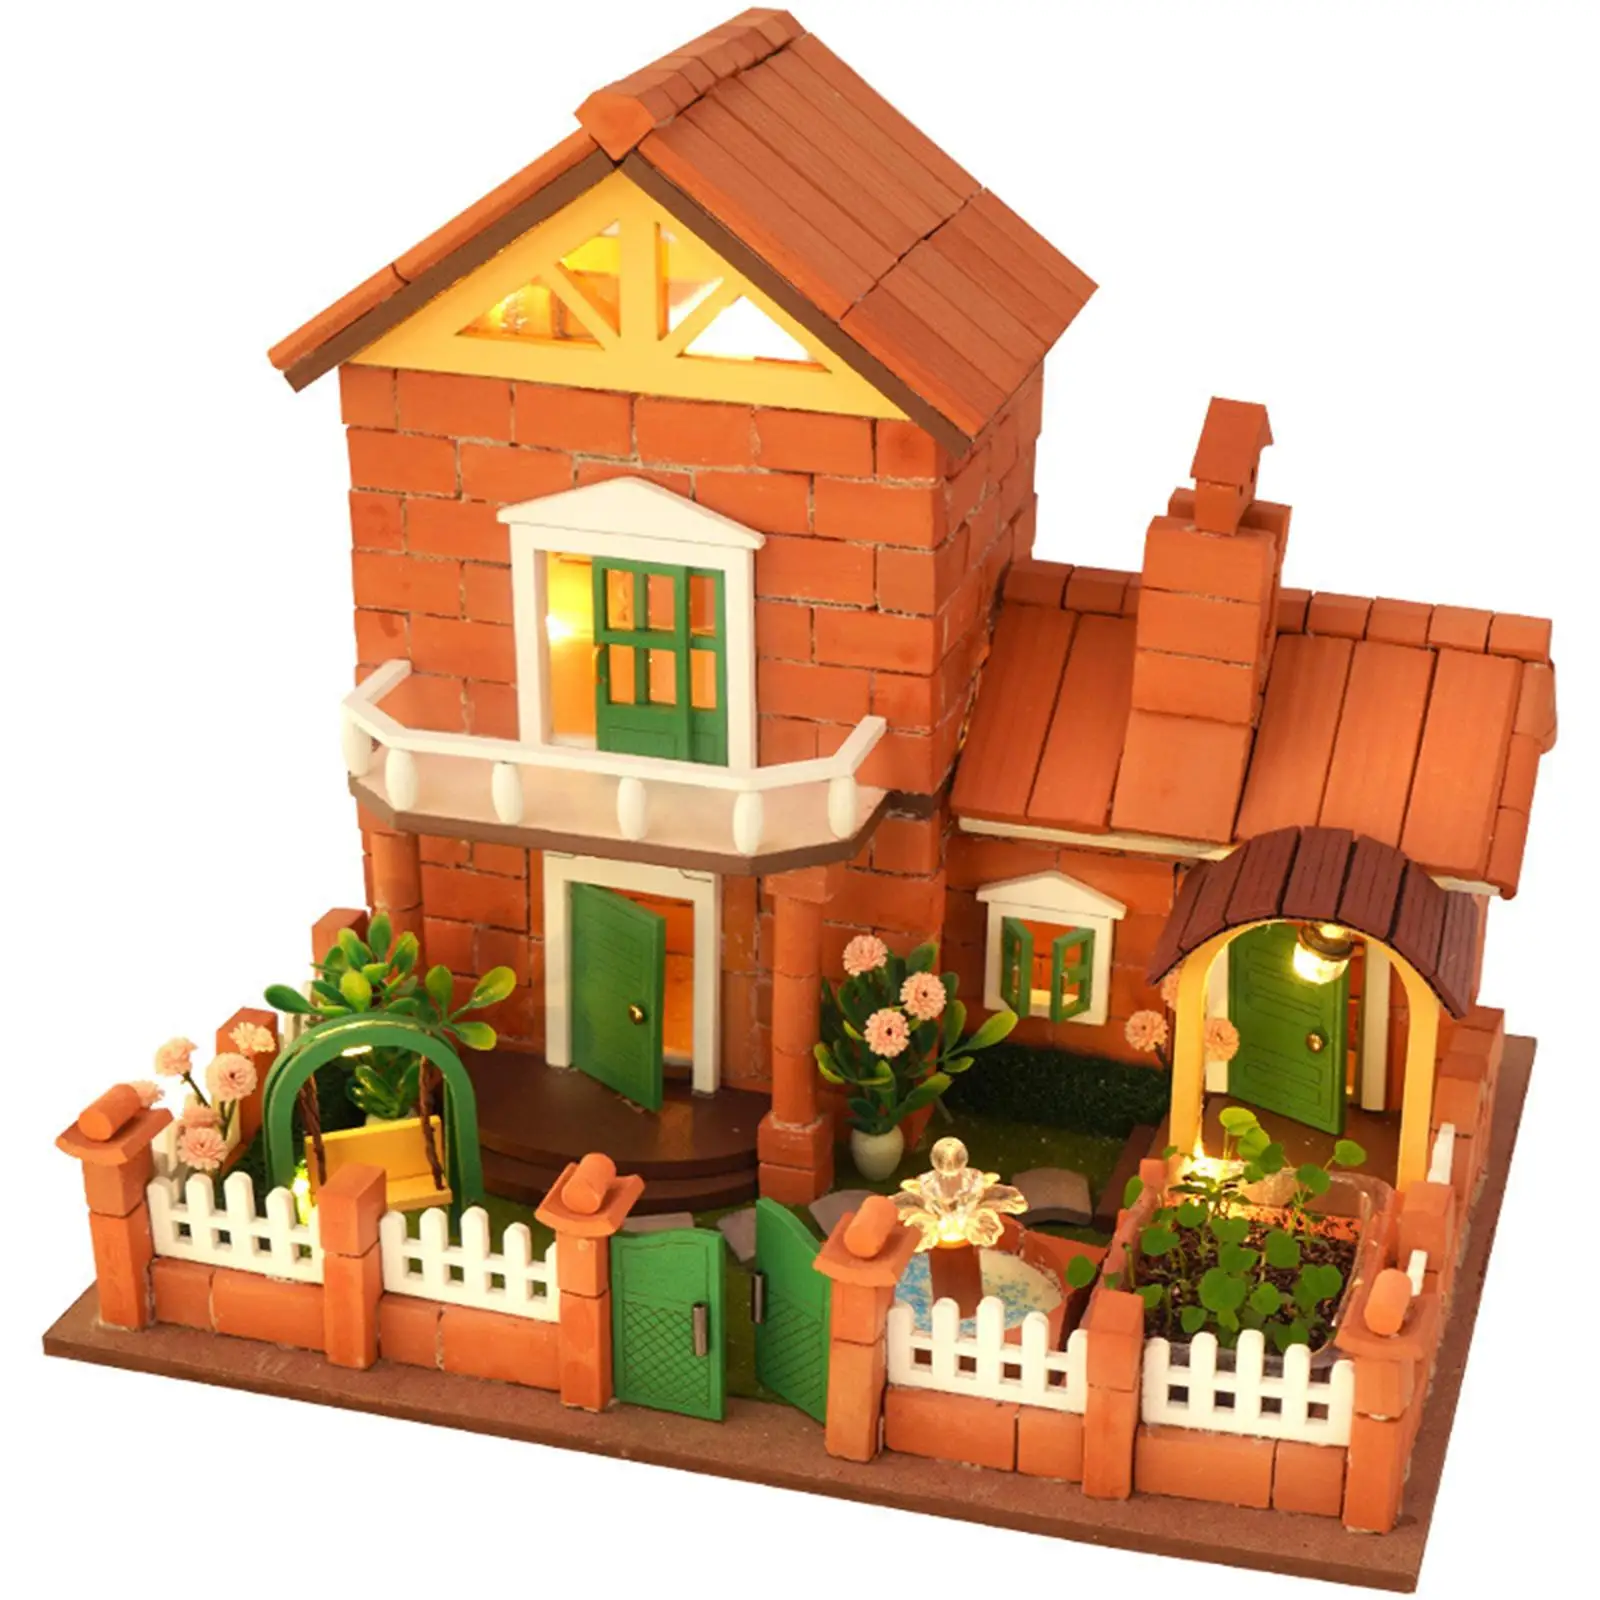 Creative Handcraft Dollhouse Kits, with Real Bricks Kit, Building Material,   Wooden  Assembly for Kids Adults